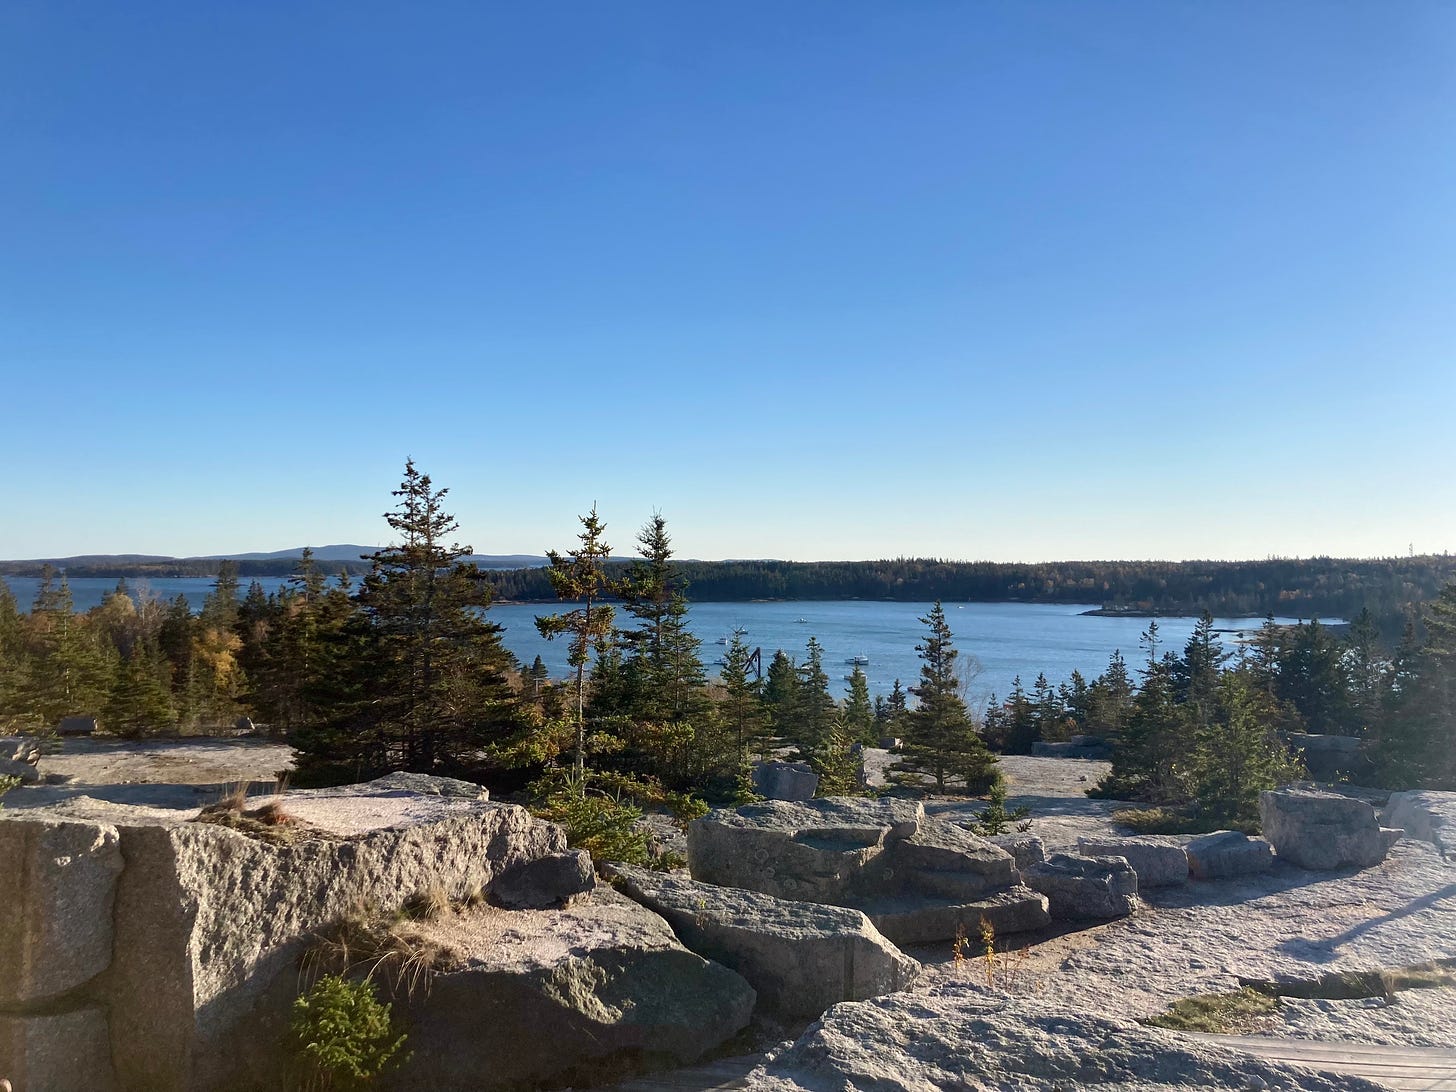 A large excavated area of a granite quarry, with ocean, boats, and cloudless sky in the background. There are evergreens growing throughout the quarry in between the rocks.